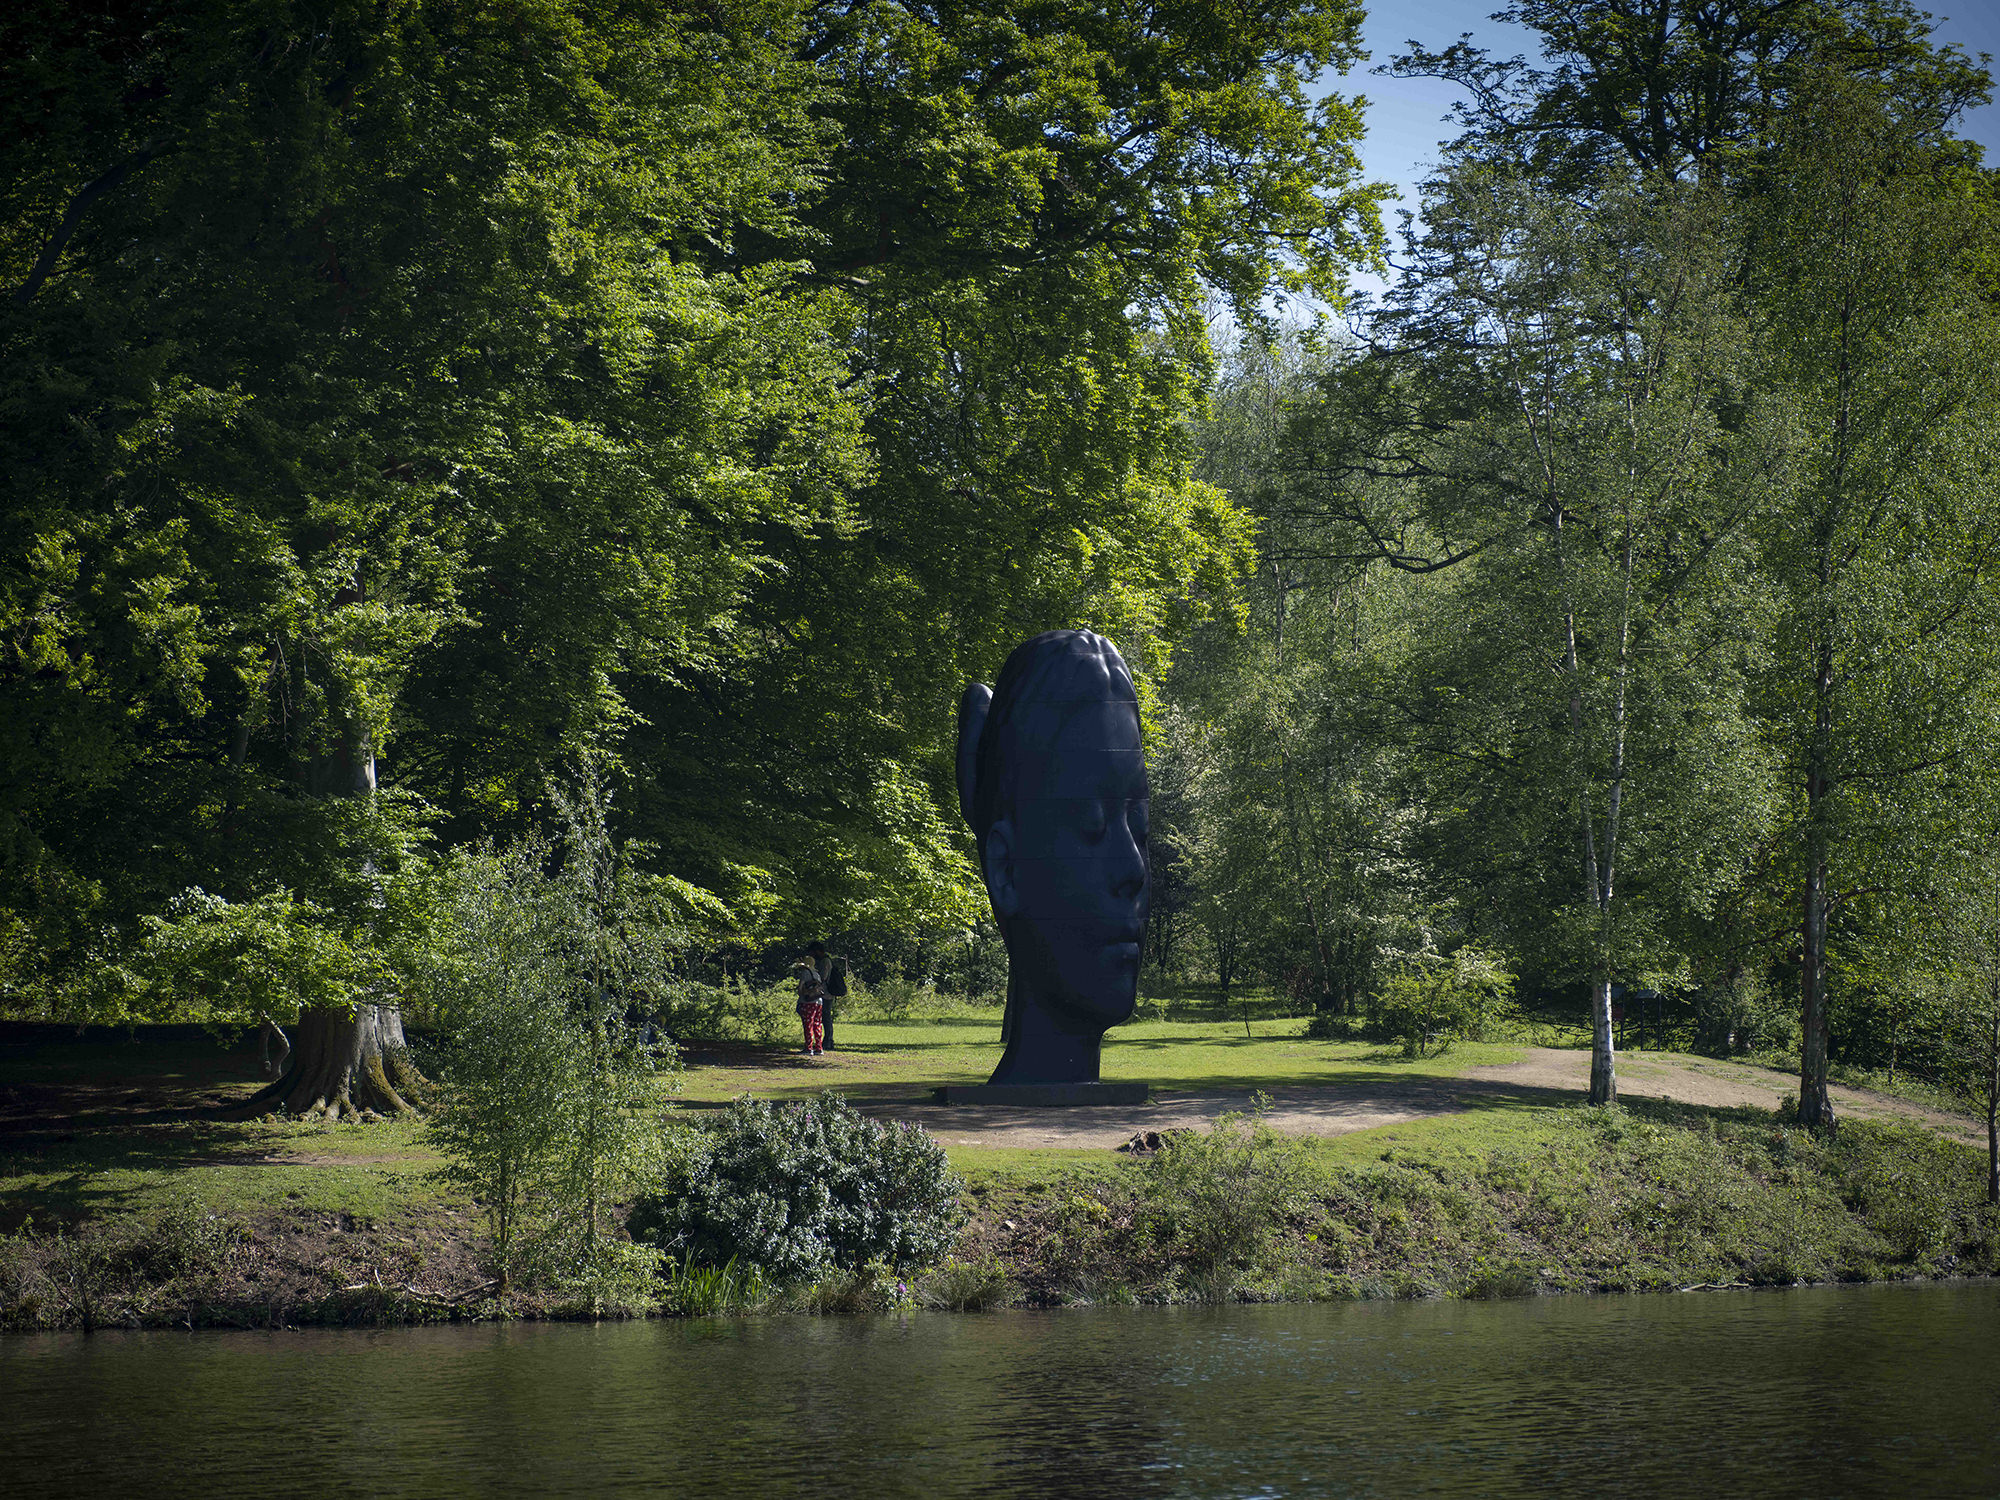 Jaume Plensa, Wilsis seen from across a lake at Yorkshire Sculpture Park